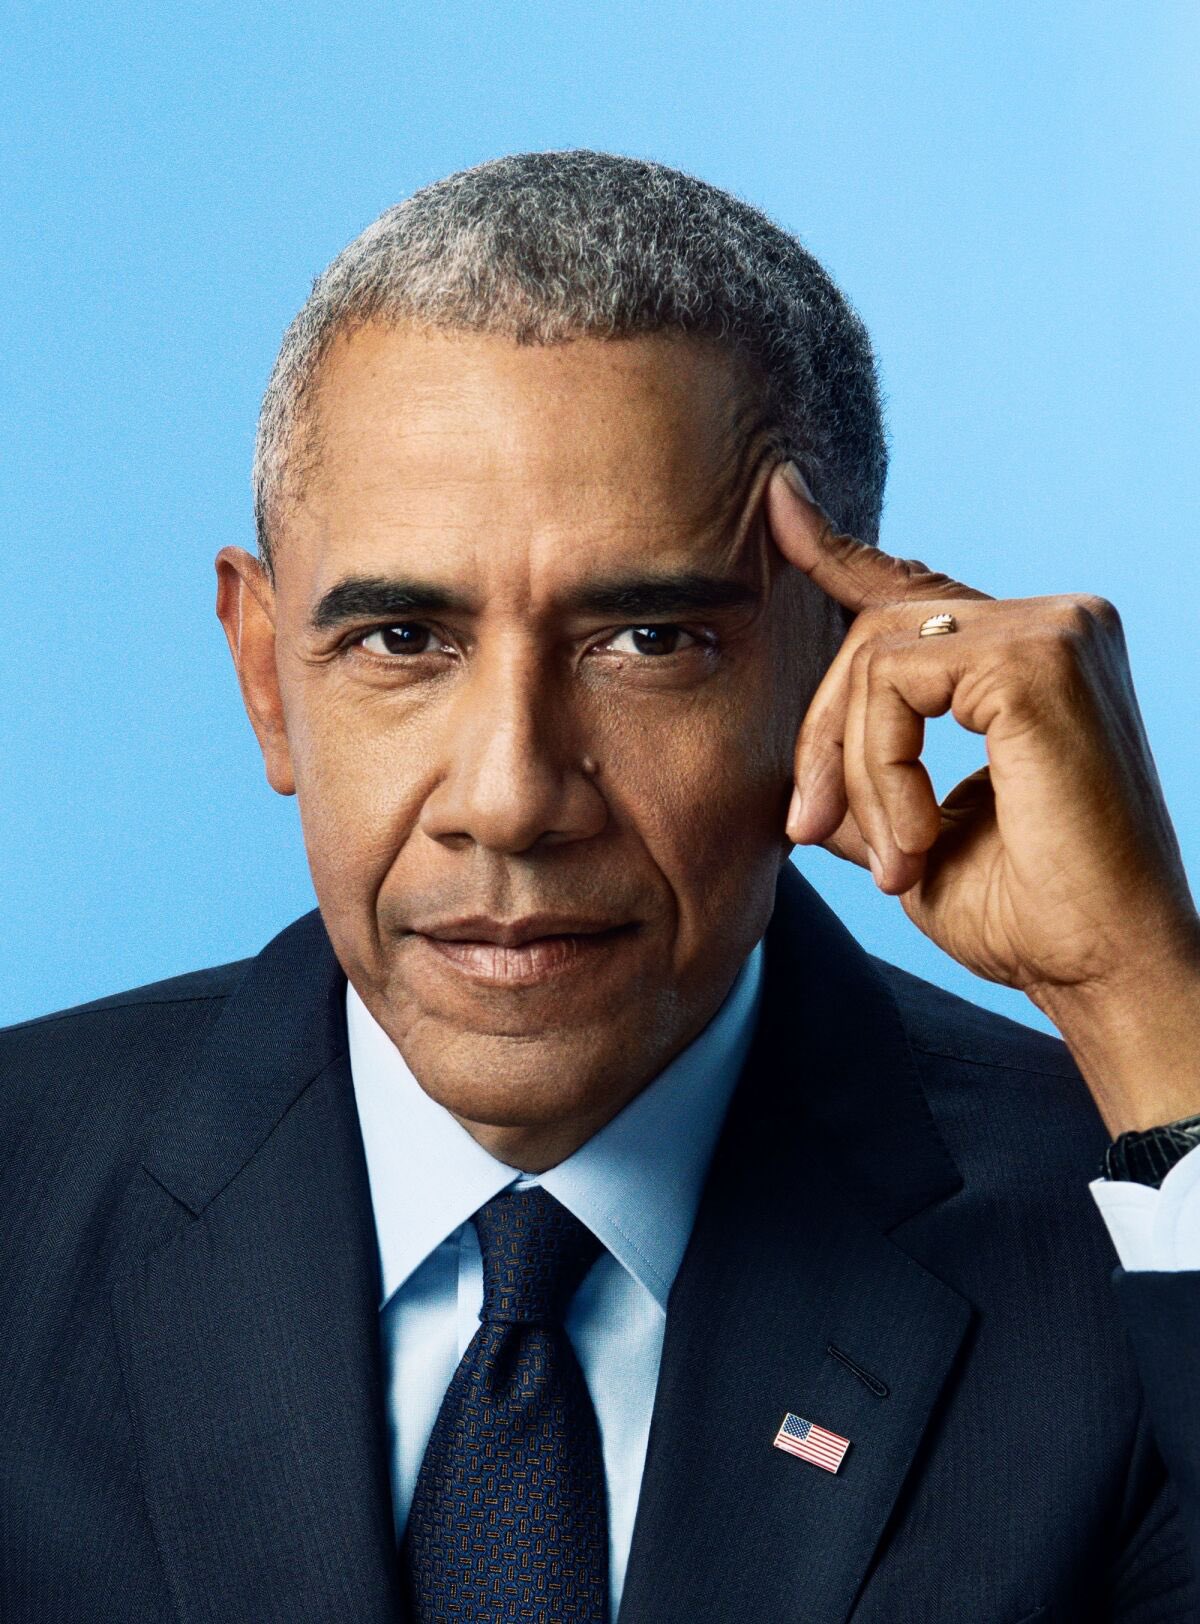 Obama lists songs from Burna Boy, Rema, Ayra Starr others as his 2022 favourite music